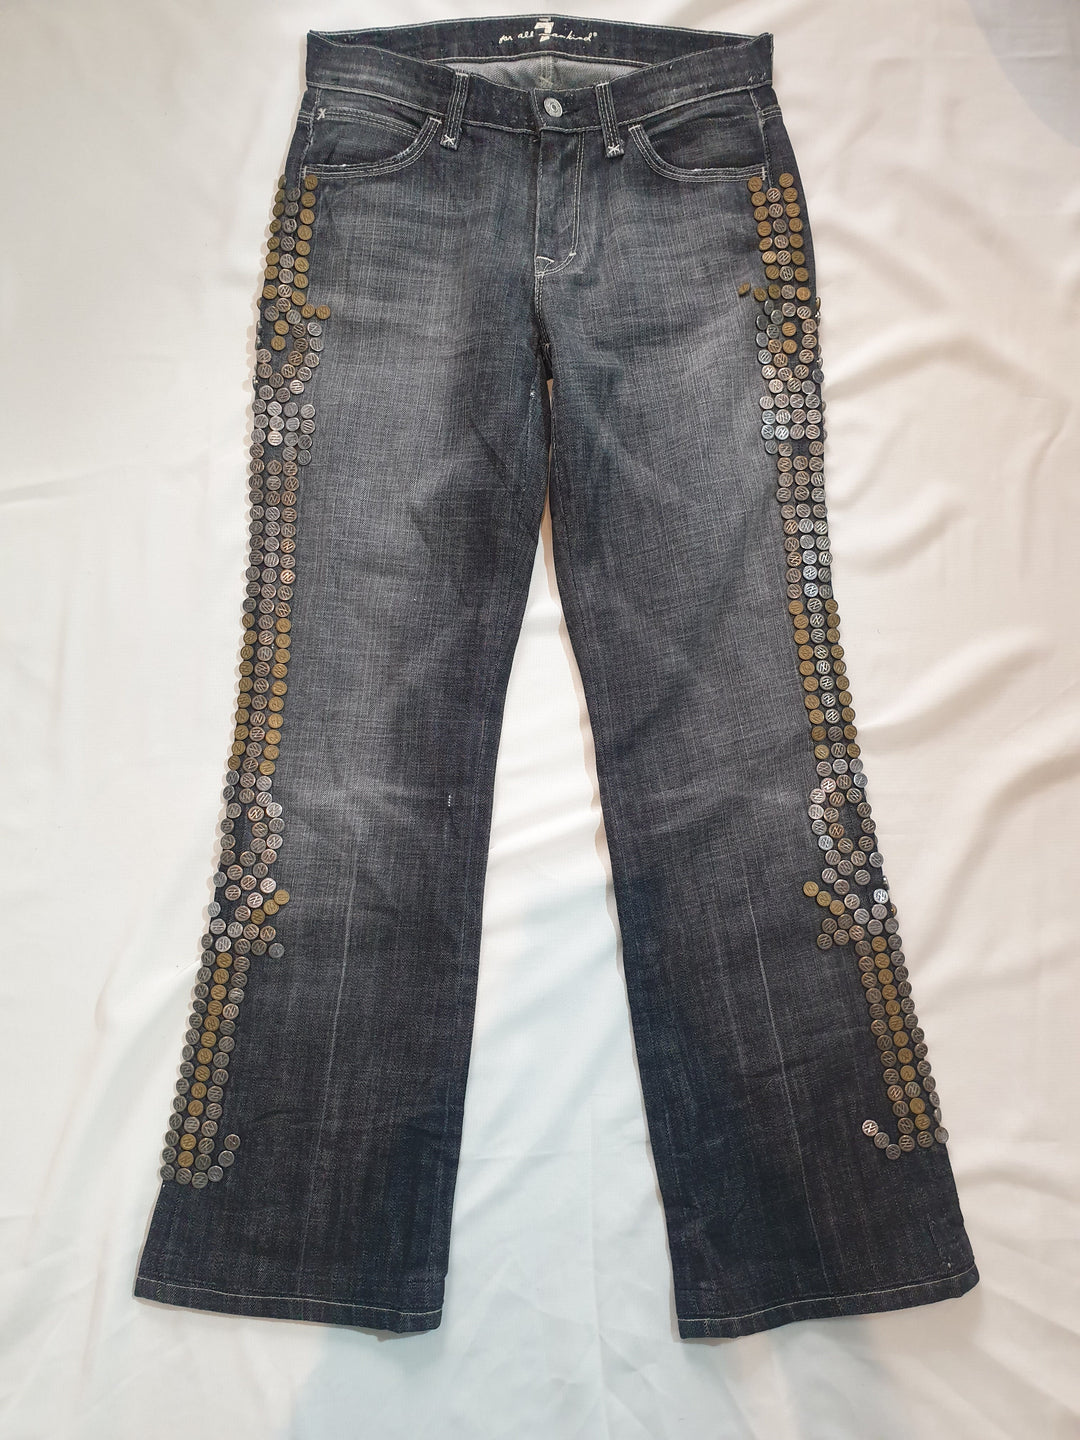 Image of 7 For All Mankind wide leg jeans